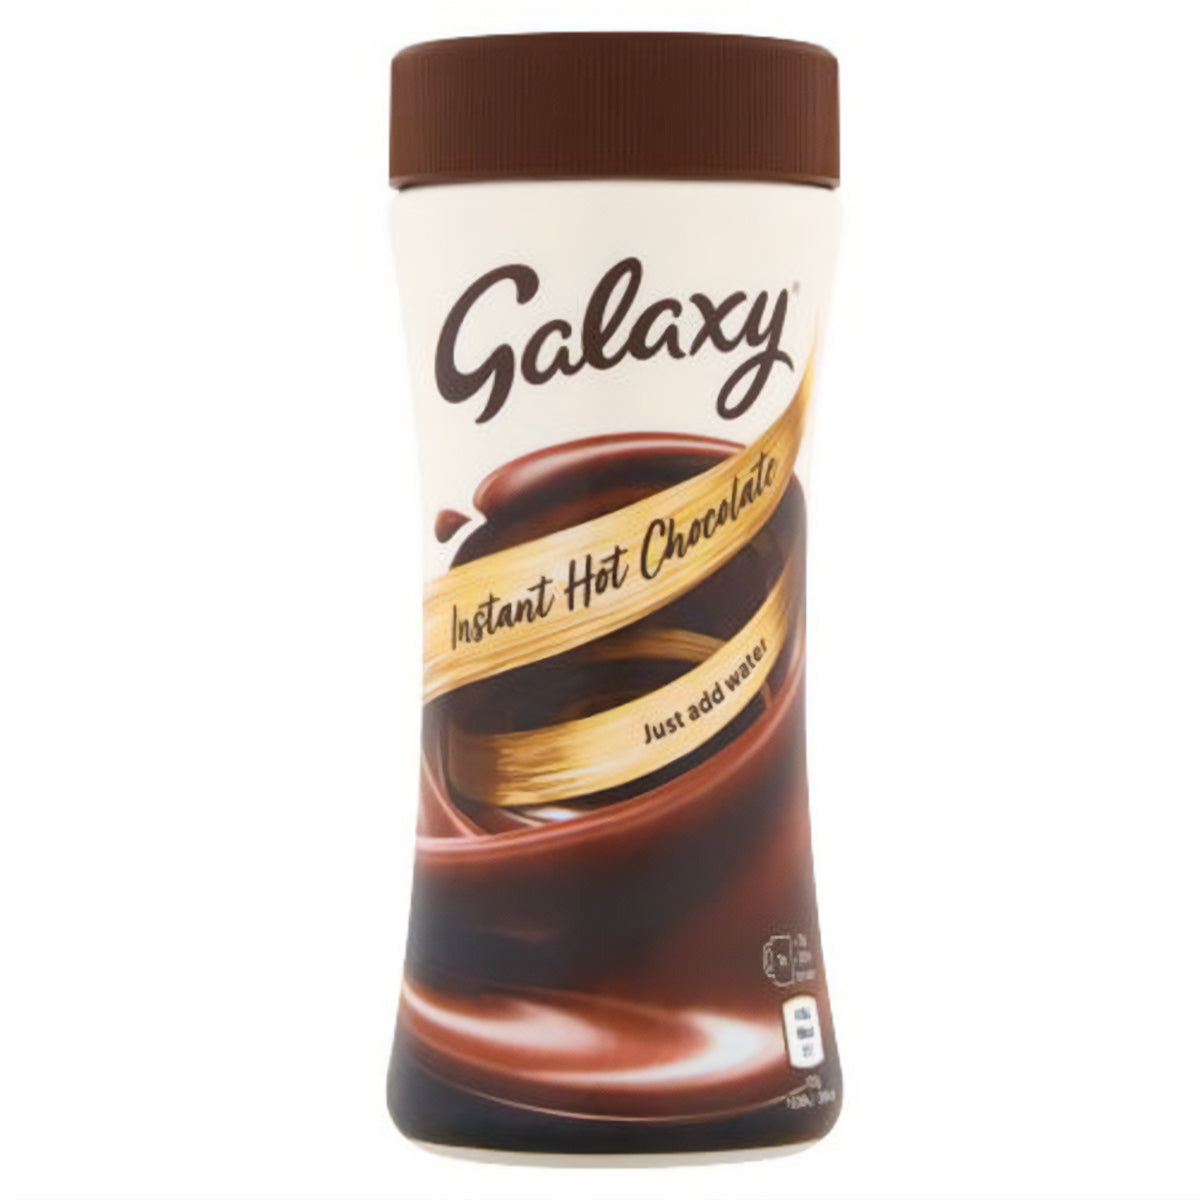 A bottle of Galaxy - Instant Hot Chocolate - 250g on a white background.